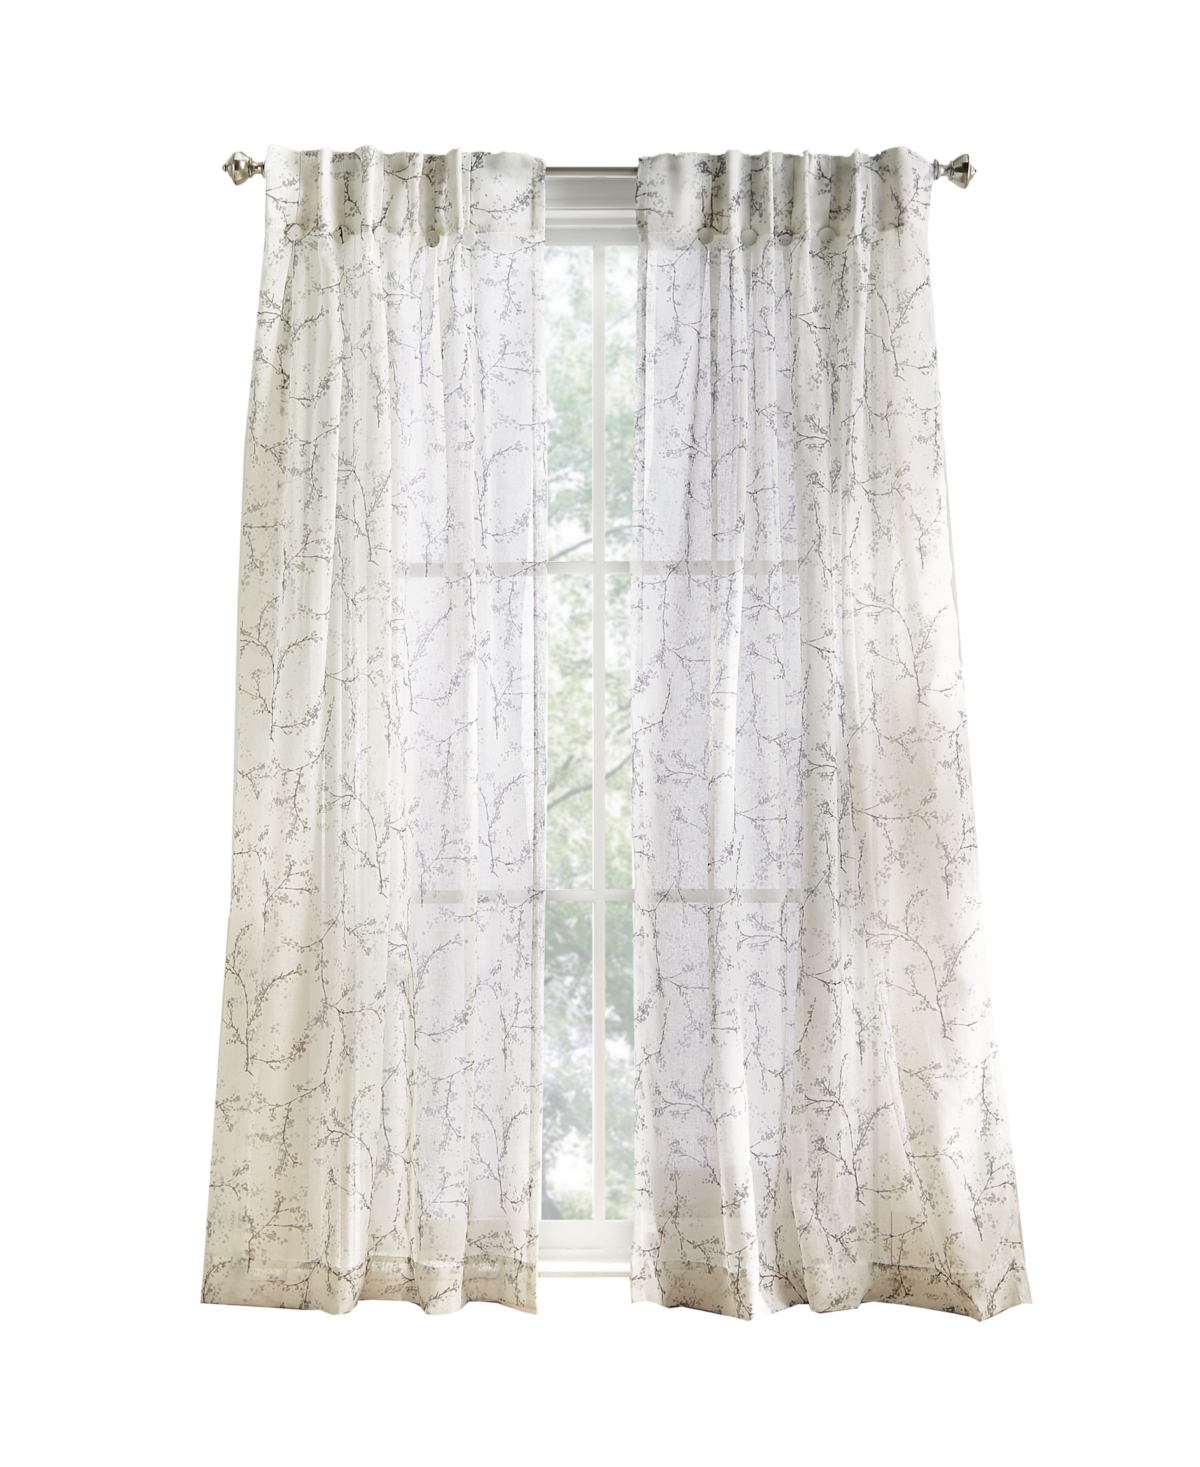 Dkny Promenade Sheer Inverted Pleat With Button 2 Piece Window Panel, 96" X 32" In Pewter